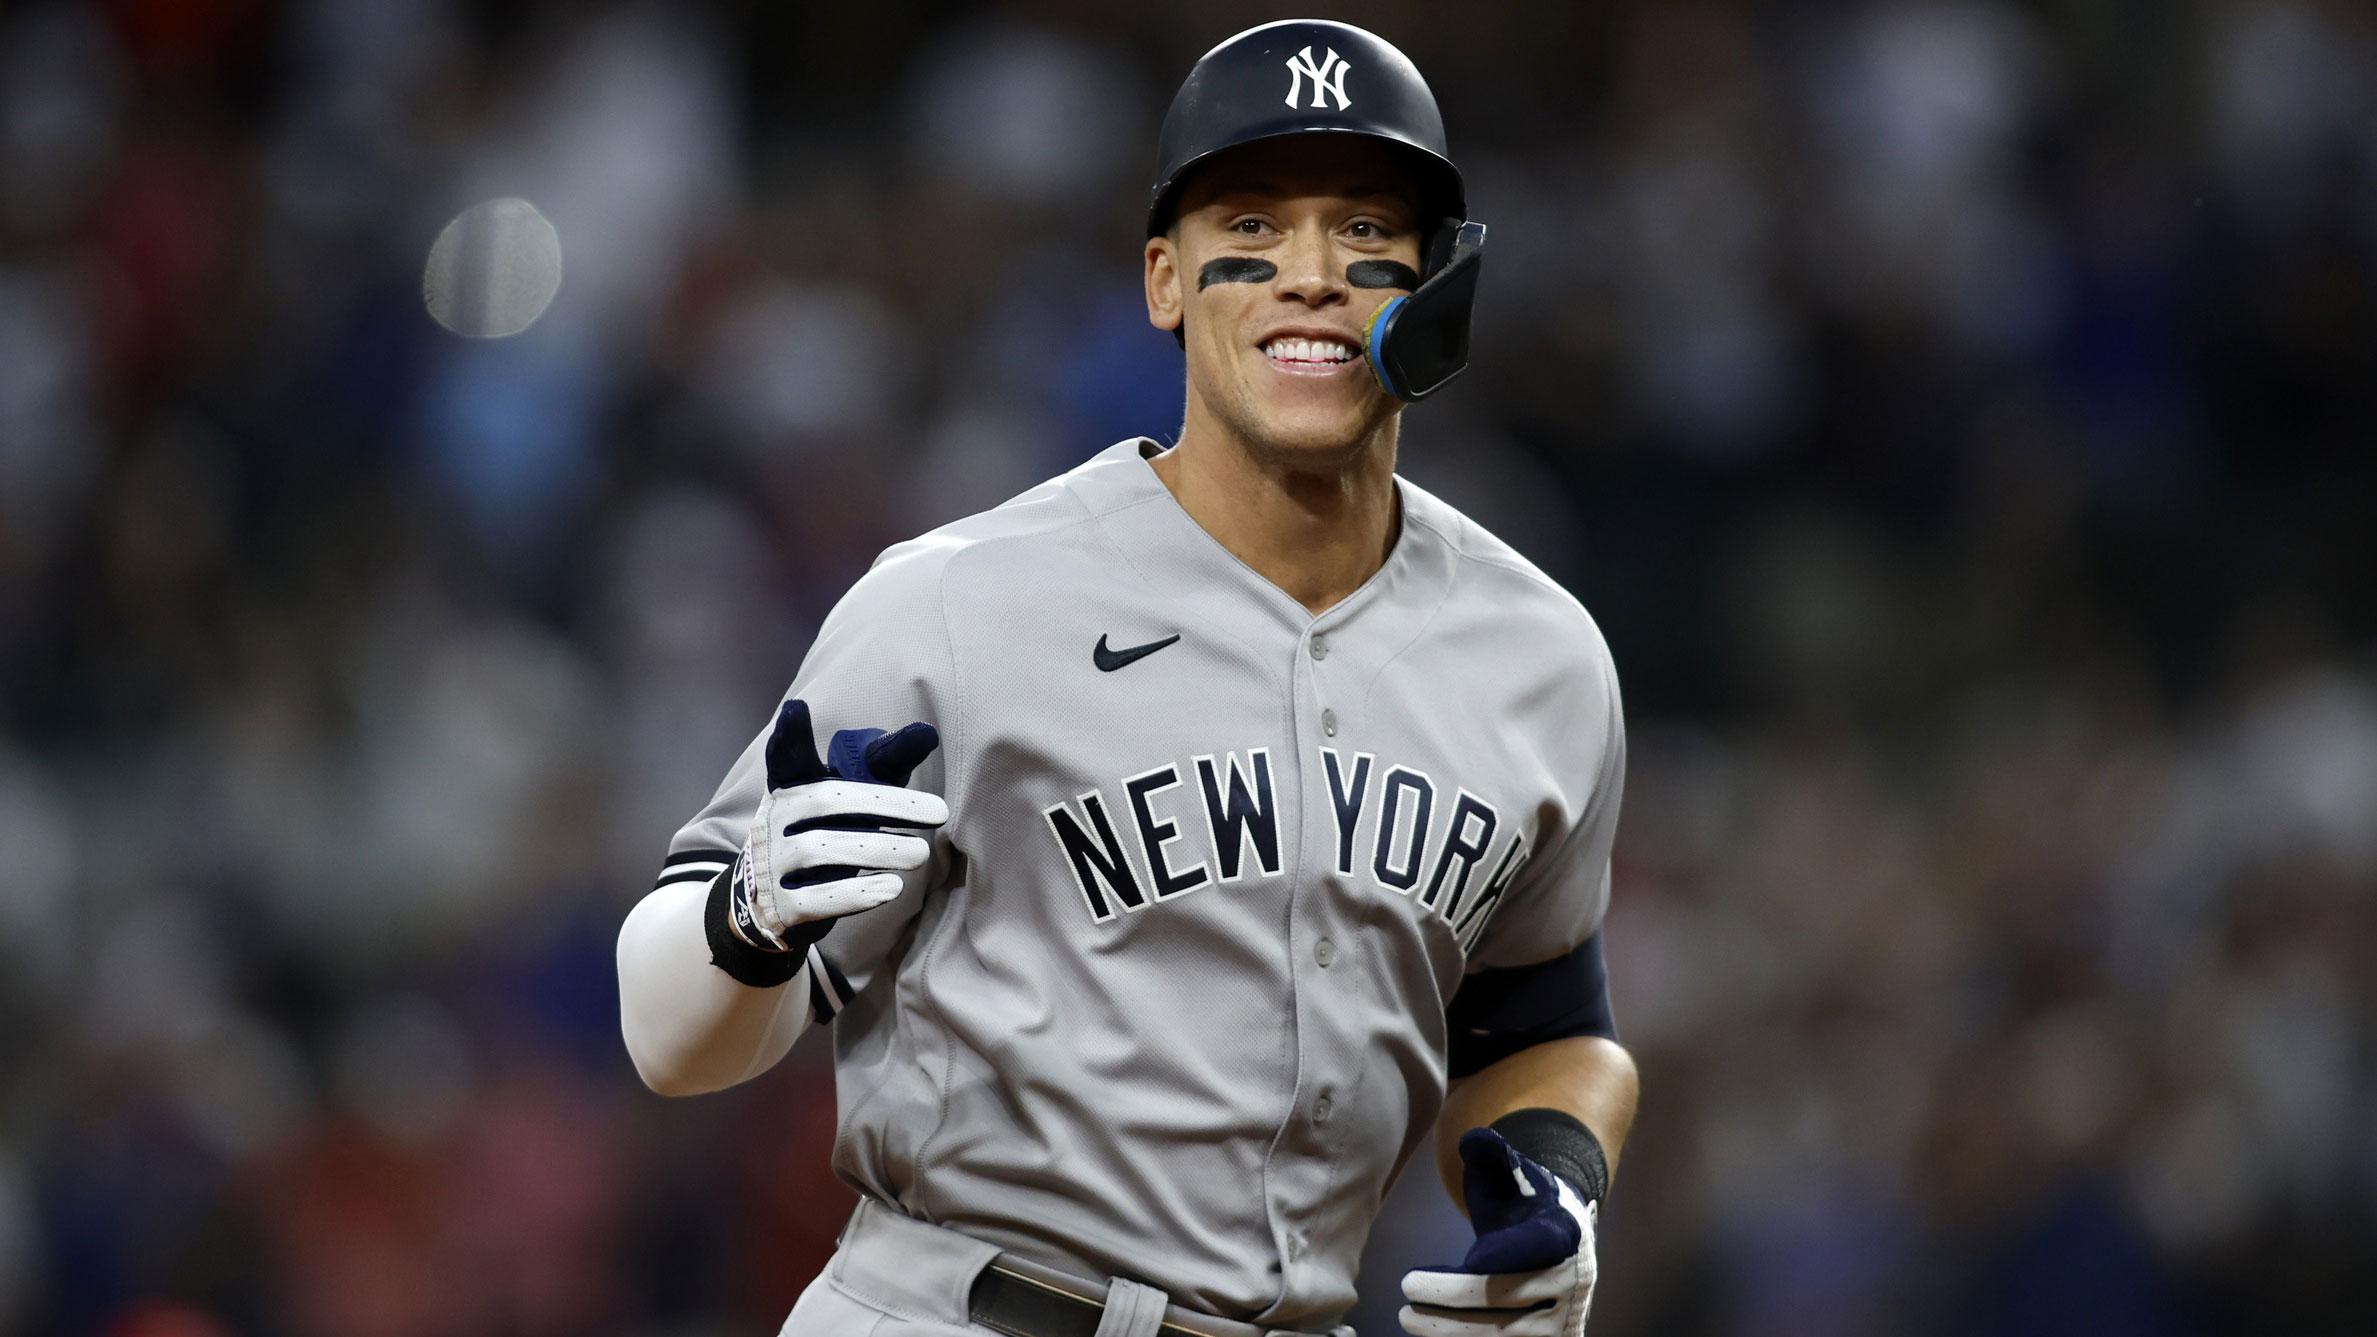 Oct 4, 2022; Arlington, Texas, USA; New York Yankees right fielder Aaron Judge (99) rounds the bases after hitting home run number sixty-two to break the American League home run record in the first inning against the Texas Rangers at Globe Life Field. / Tim Heitman-USA TODAY Sports